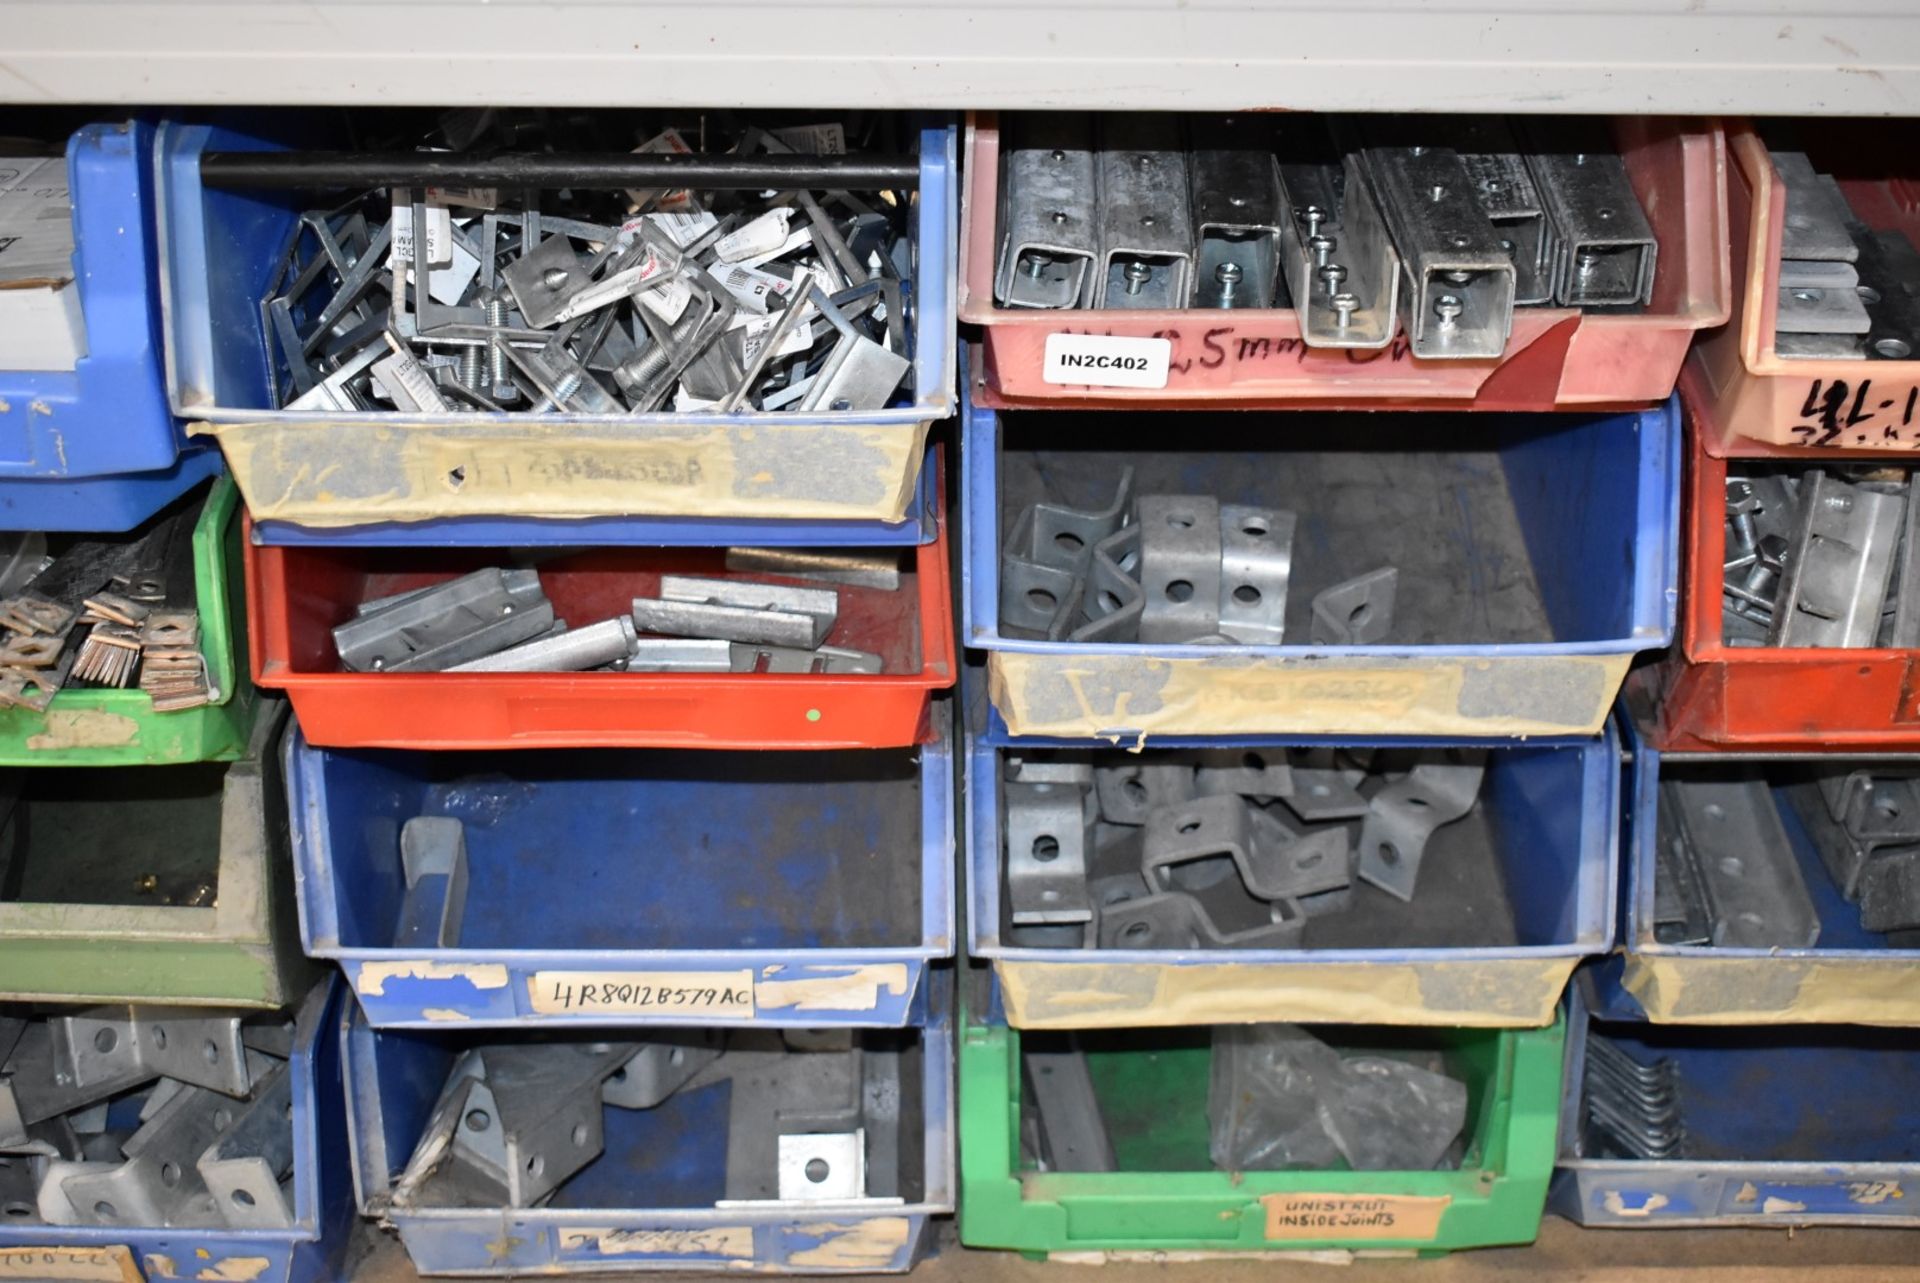 23 x Large Linbins With Contents - Includes Various Metal Conduit Fittings and Brackets - Image 24 of 25